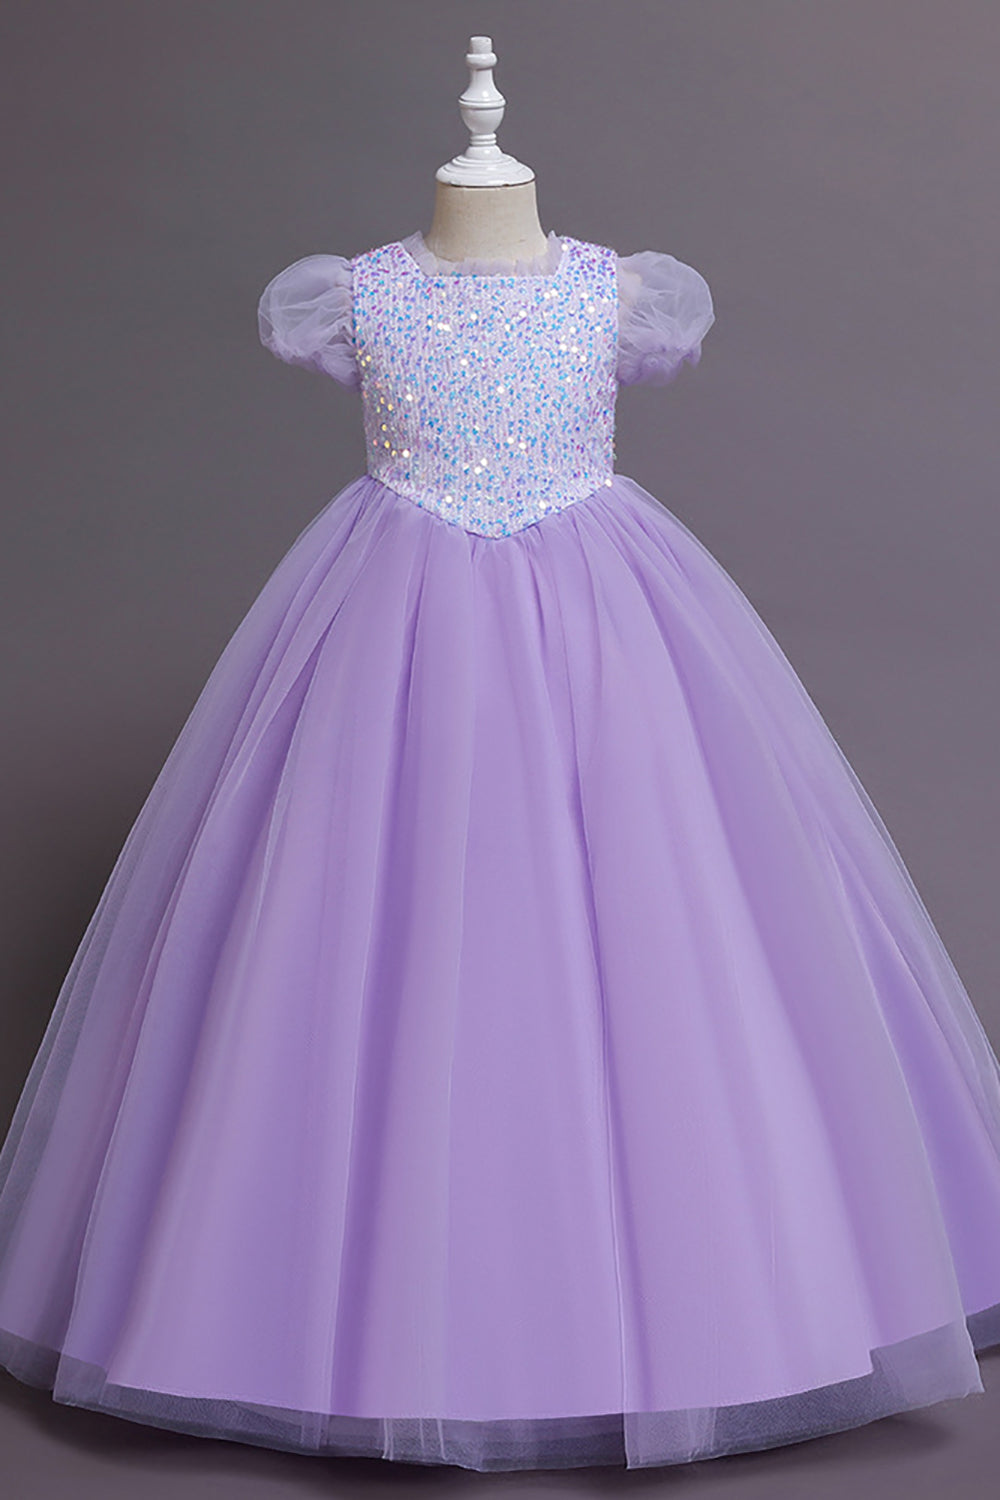 Light Blue Puff Sleeves Tulle Flower Girl Dress with Sequins